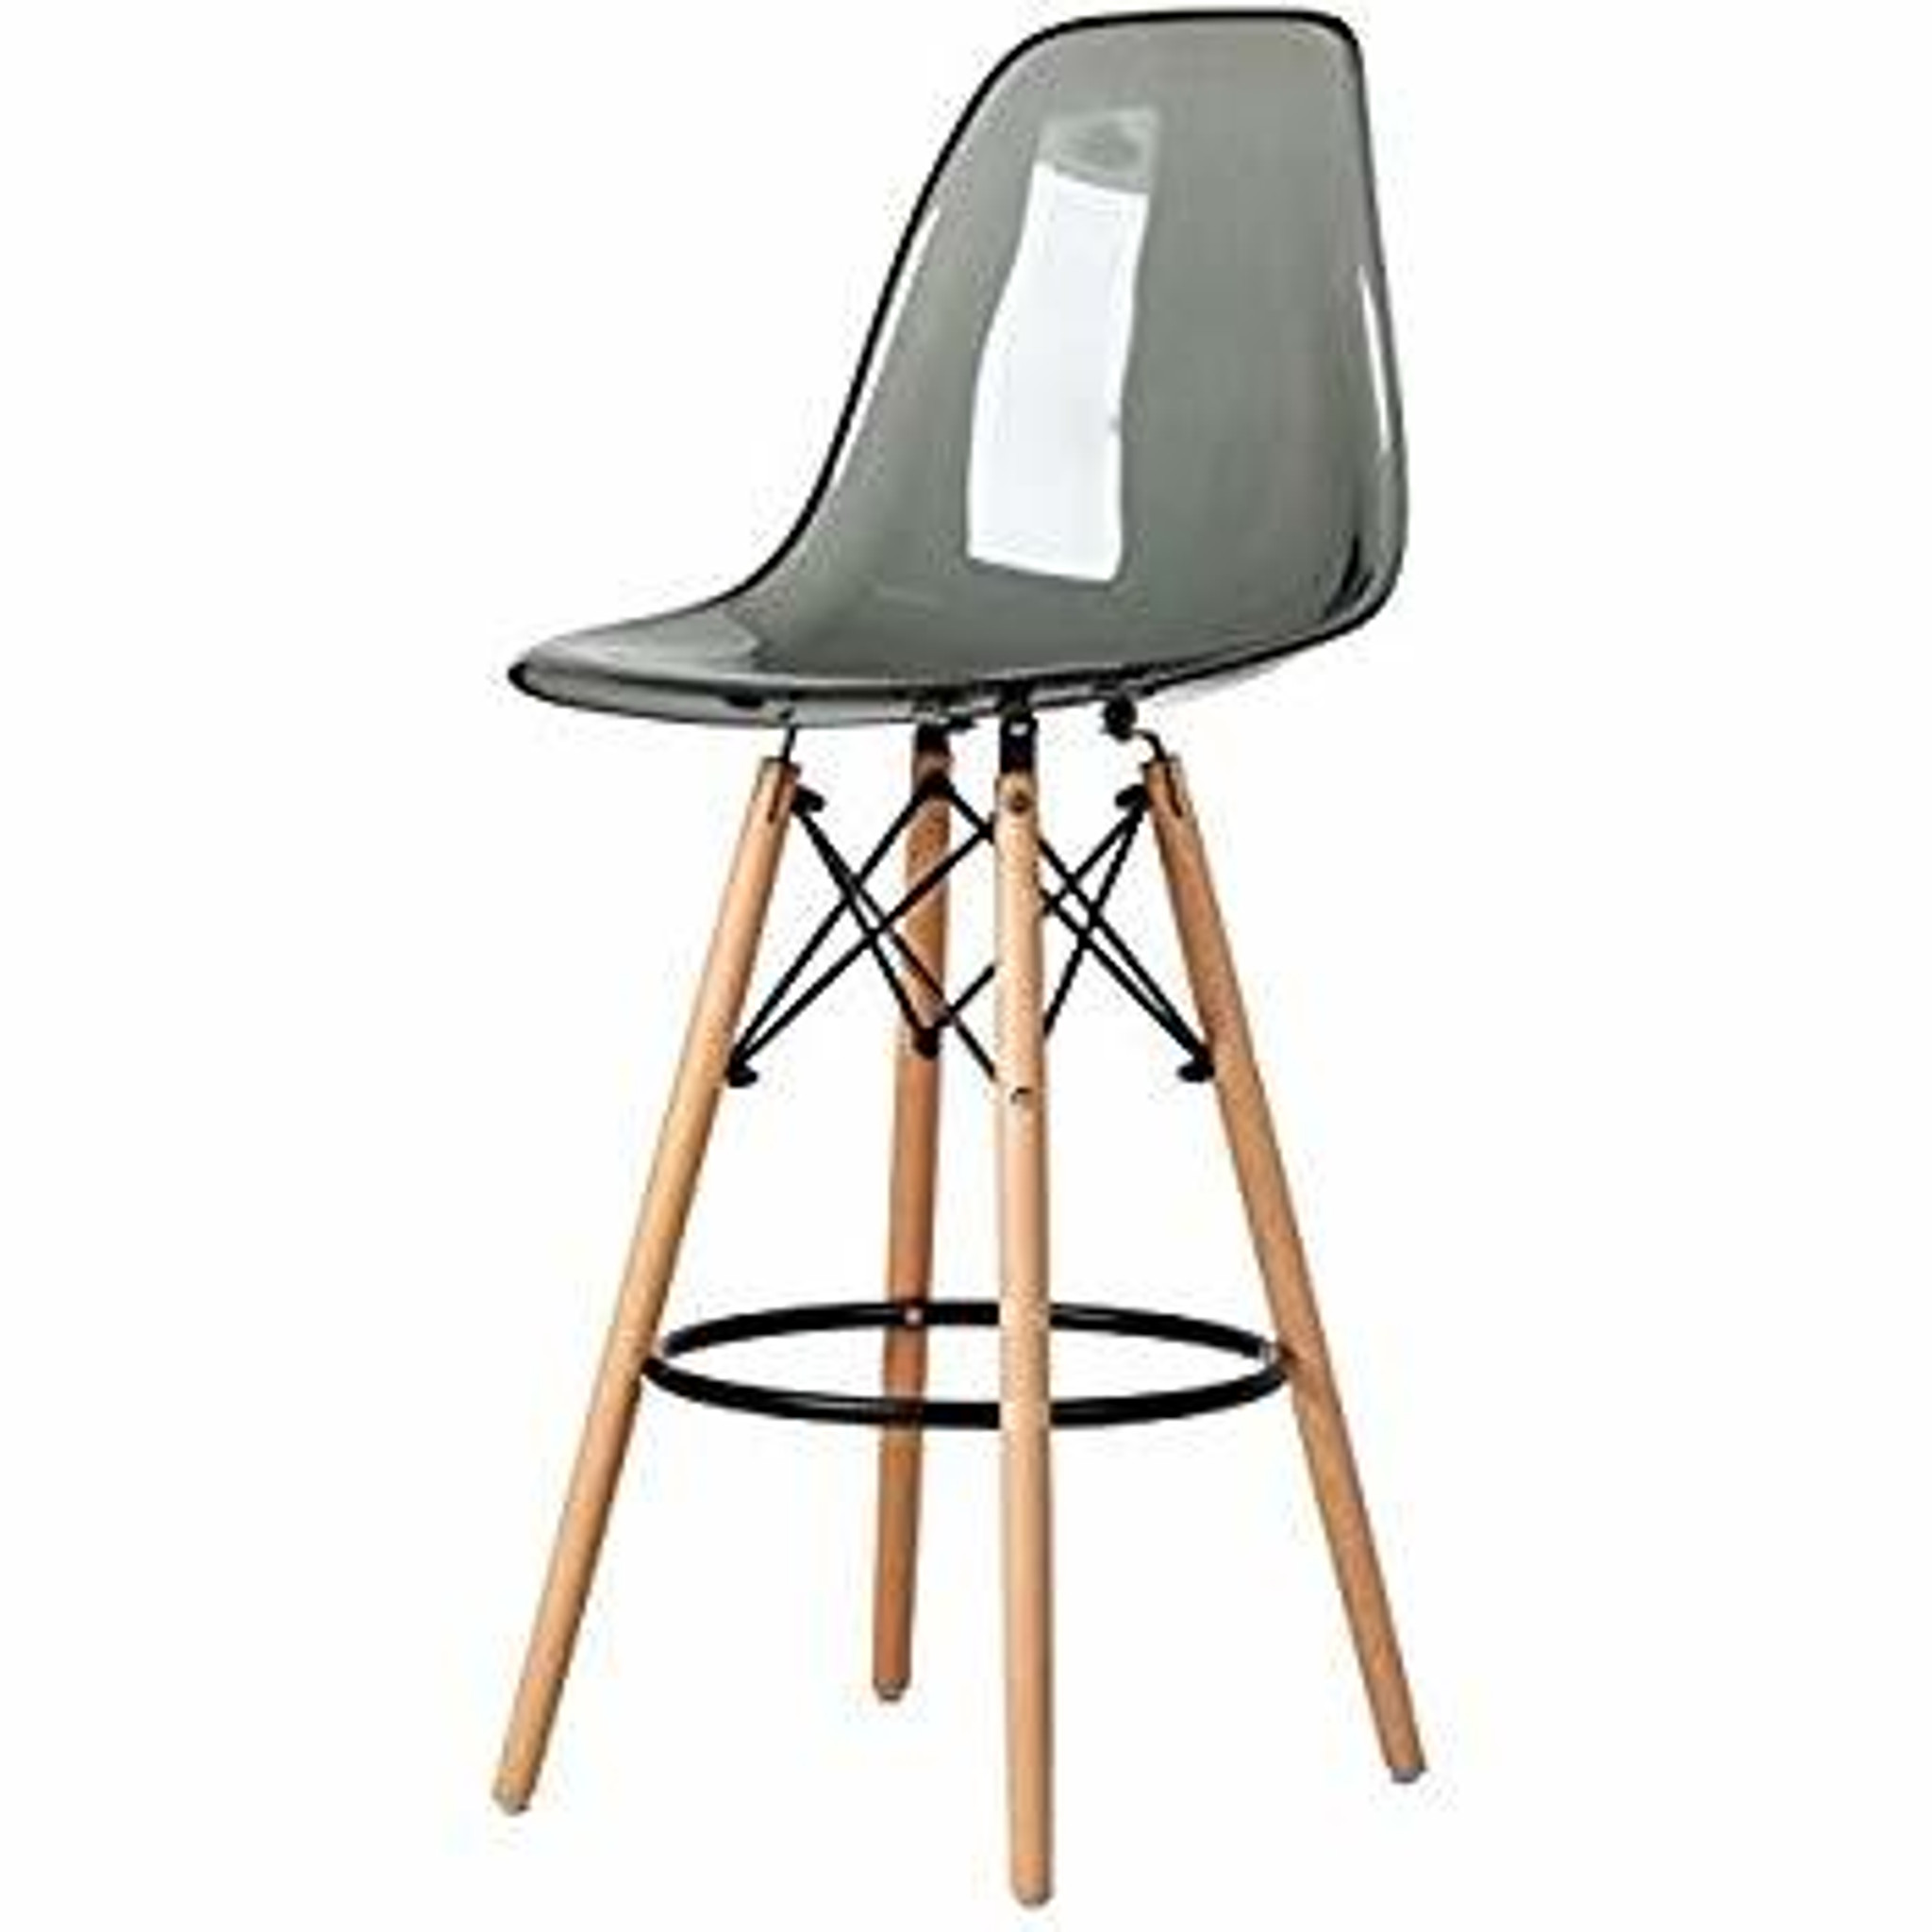 clear acrylic lucite grey eames counter stool replica with wood Eiffel legs